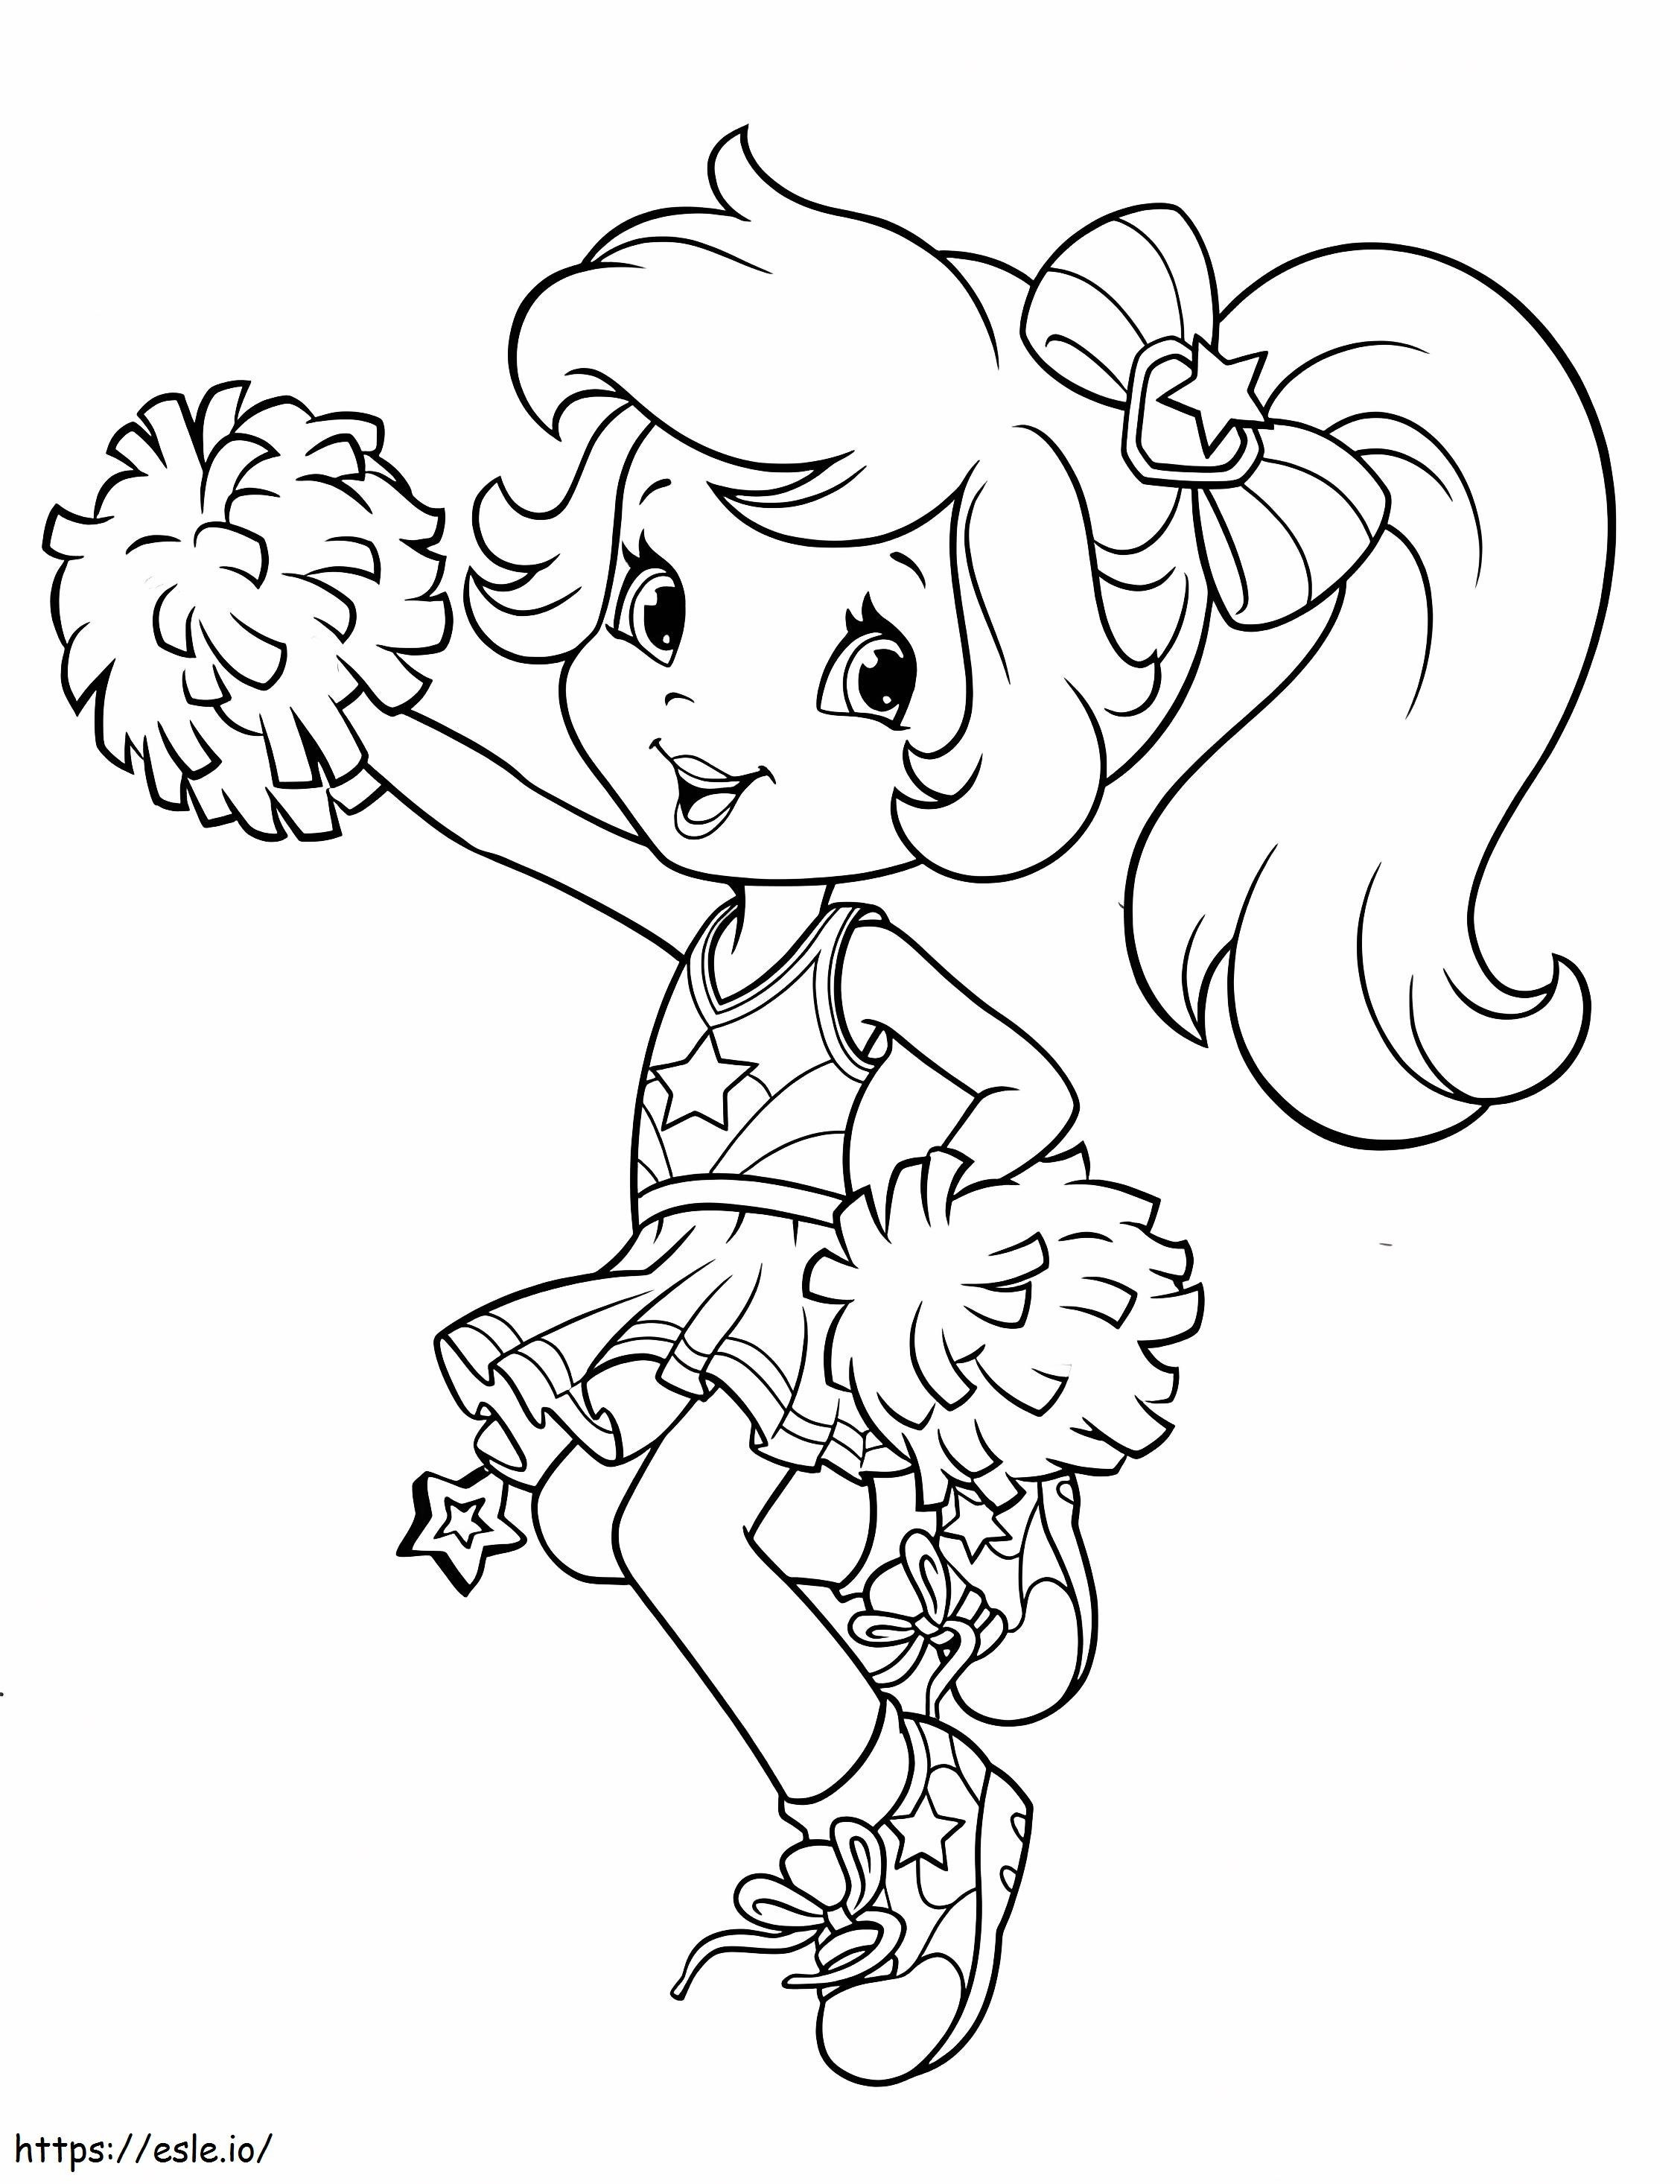 Strawberry Shortcake Dance coloring page